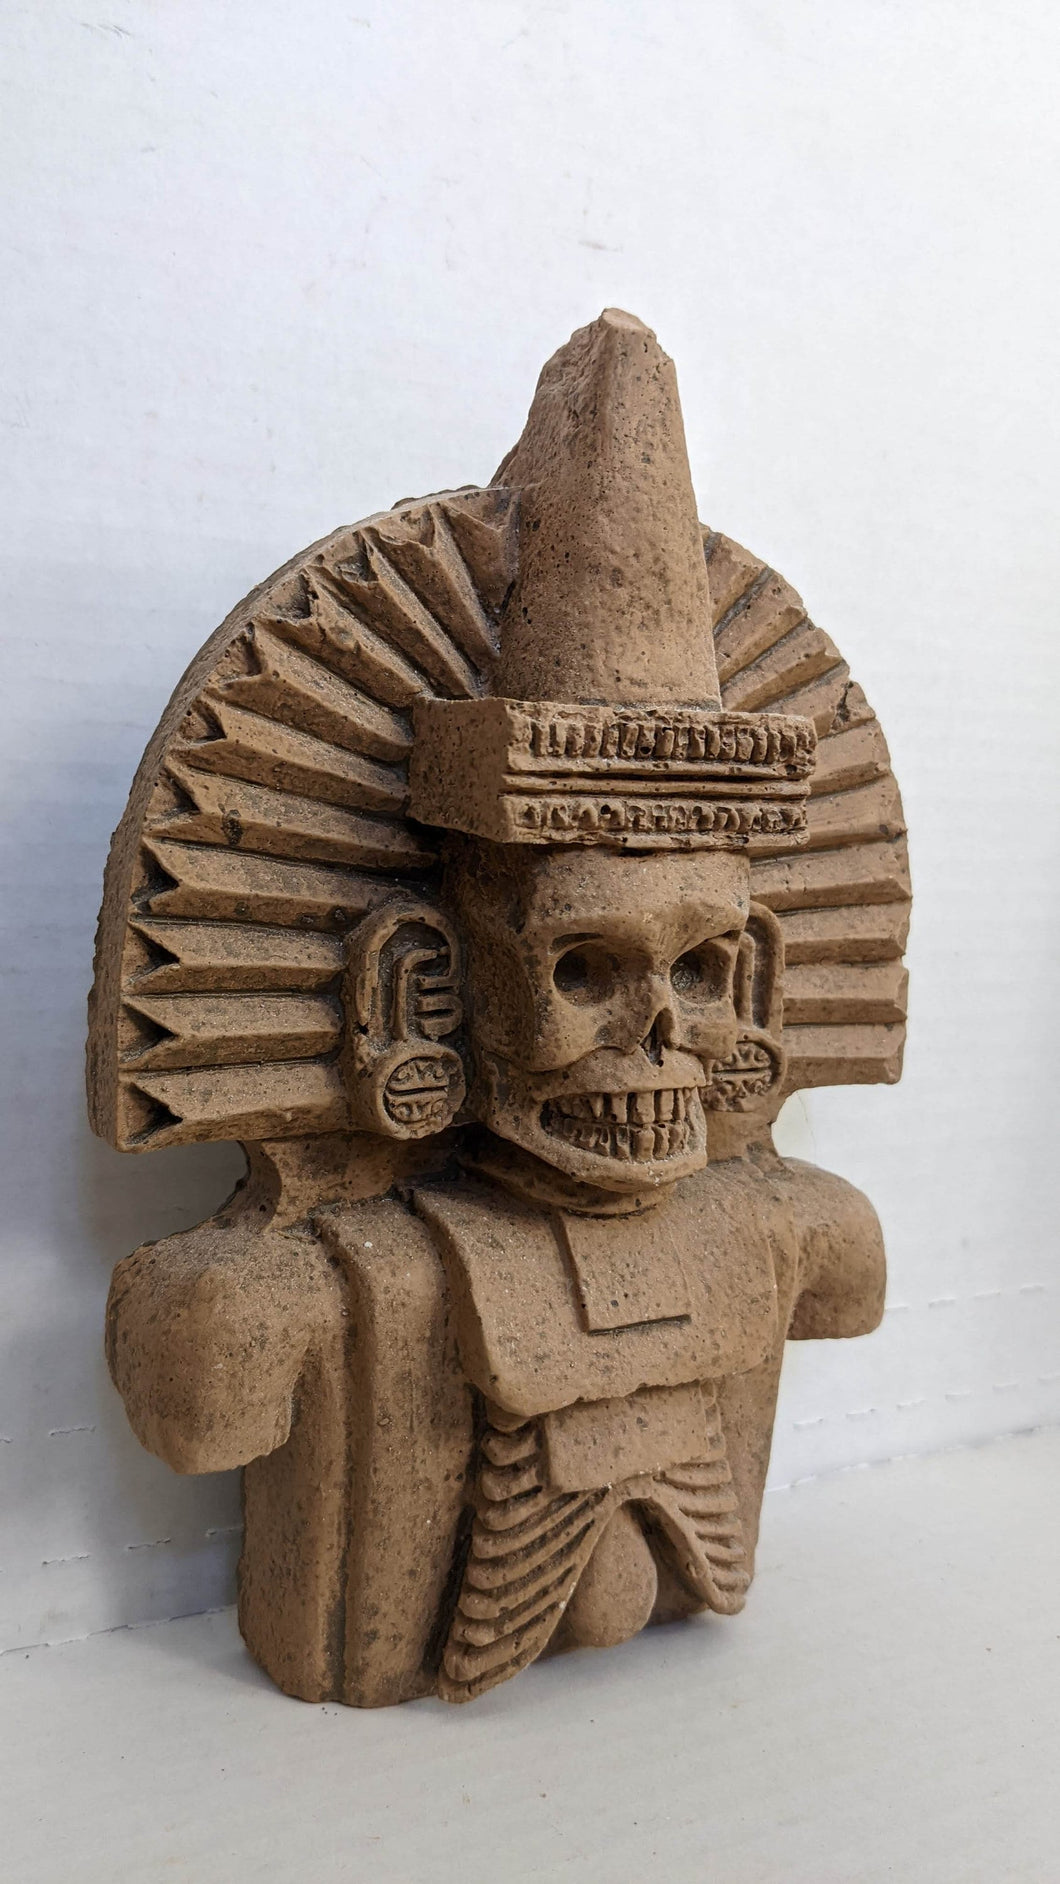 Aztec Mayan Day of the dead skeleton mexican folk lore vintage God of death figure 8